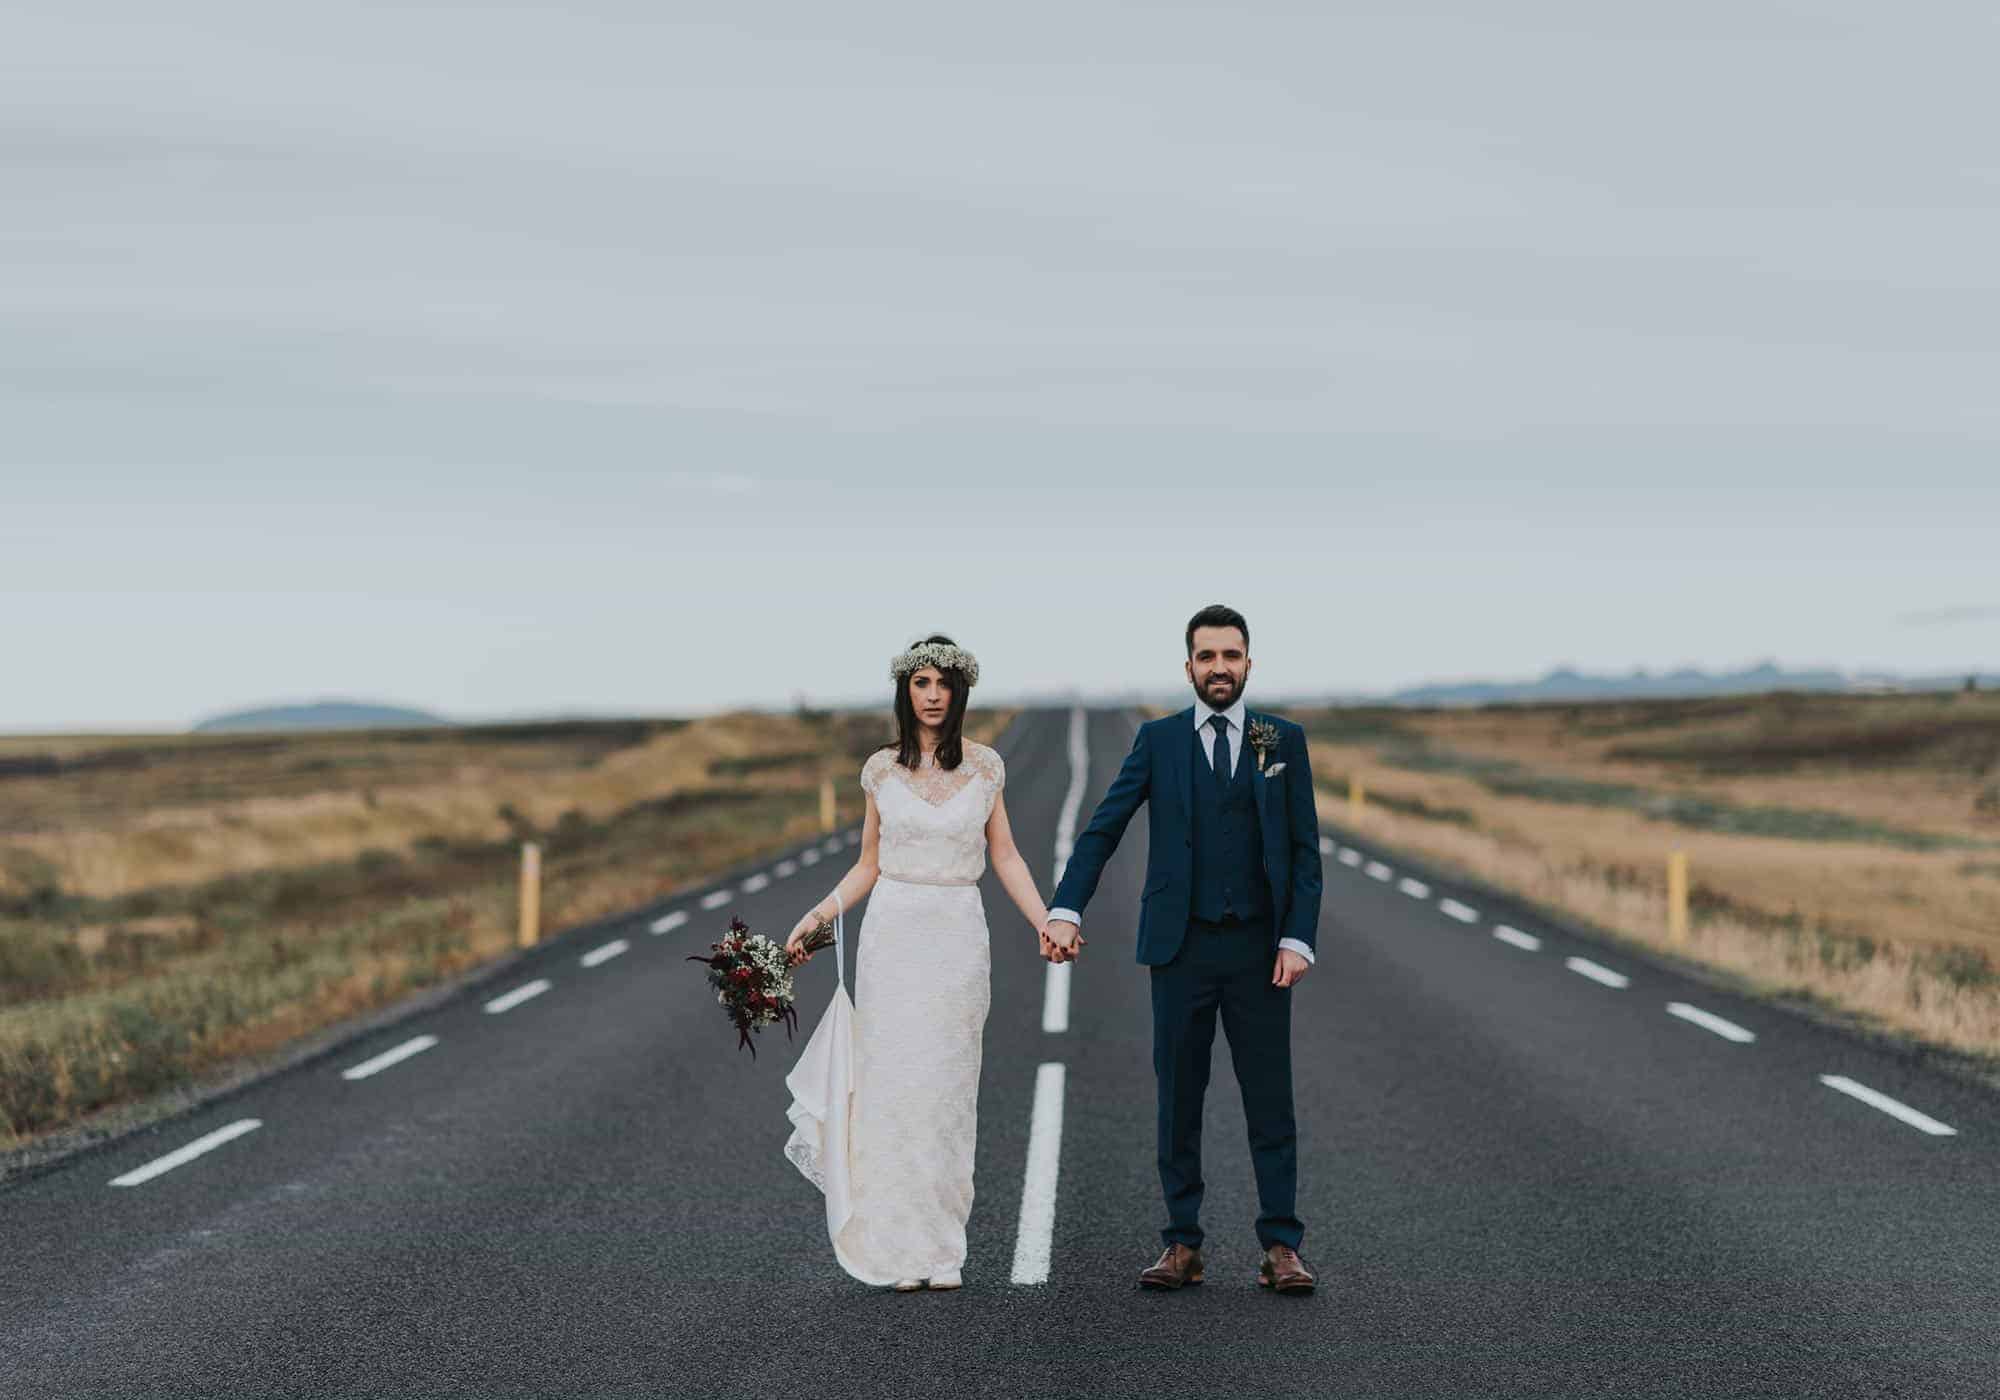 Bride in white dress and groom in suit stand in the middle of a quiet country road in south Iceland.